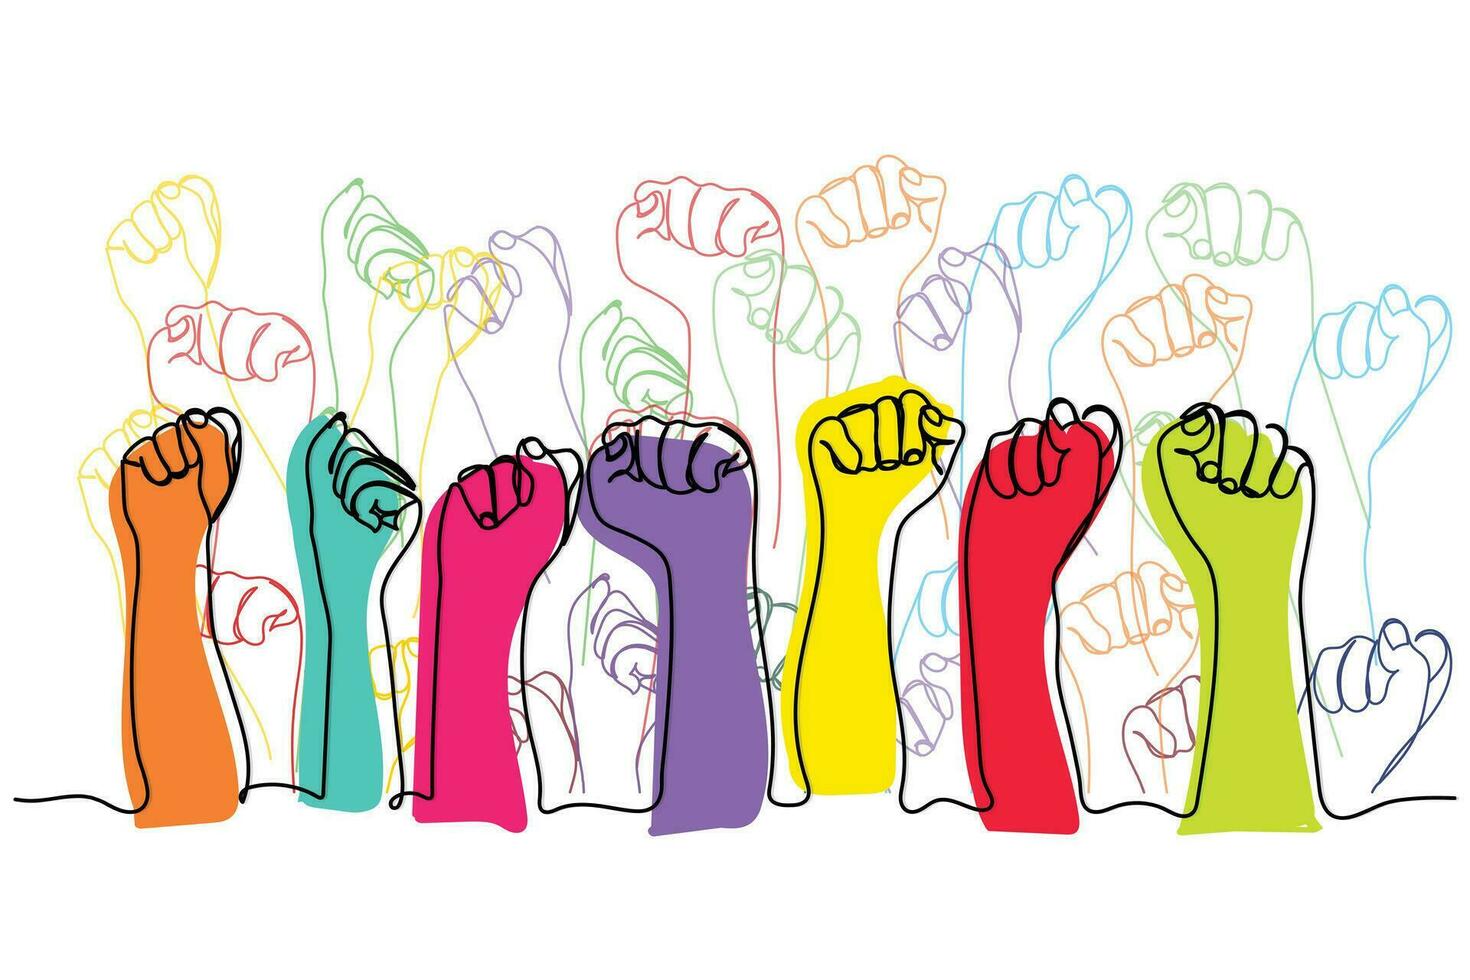 Row of man hands showing clenched fist gesture. Victory or protest group of signs vector